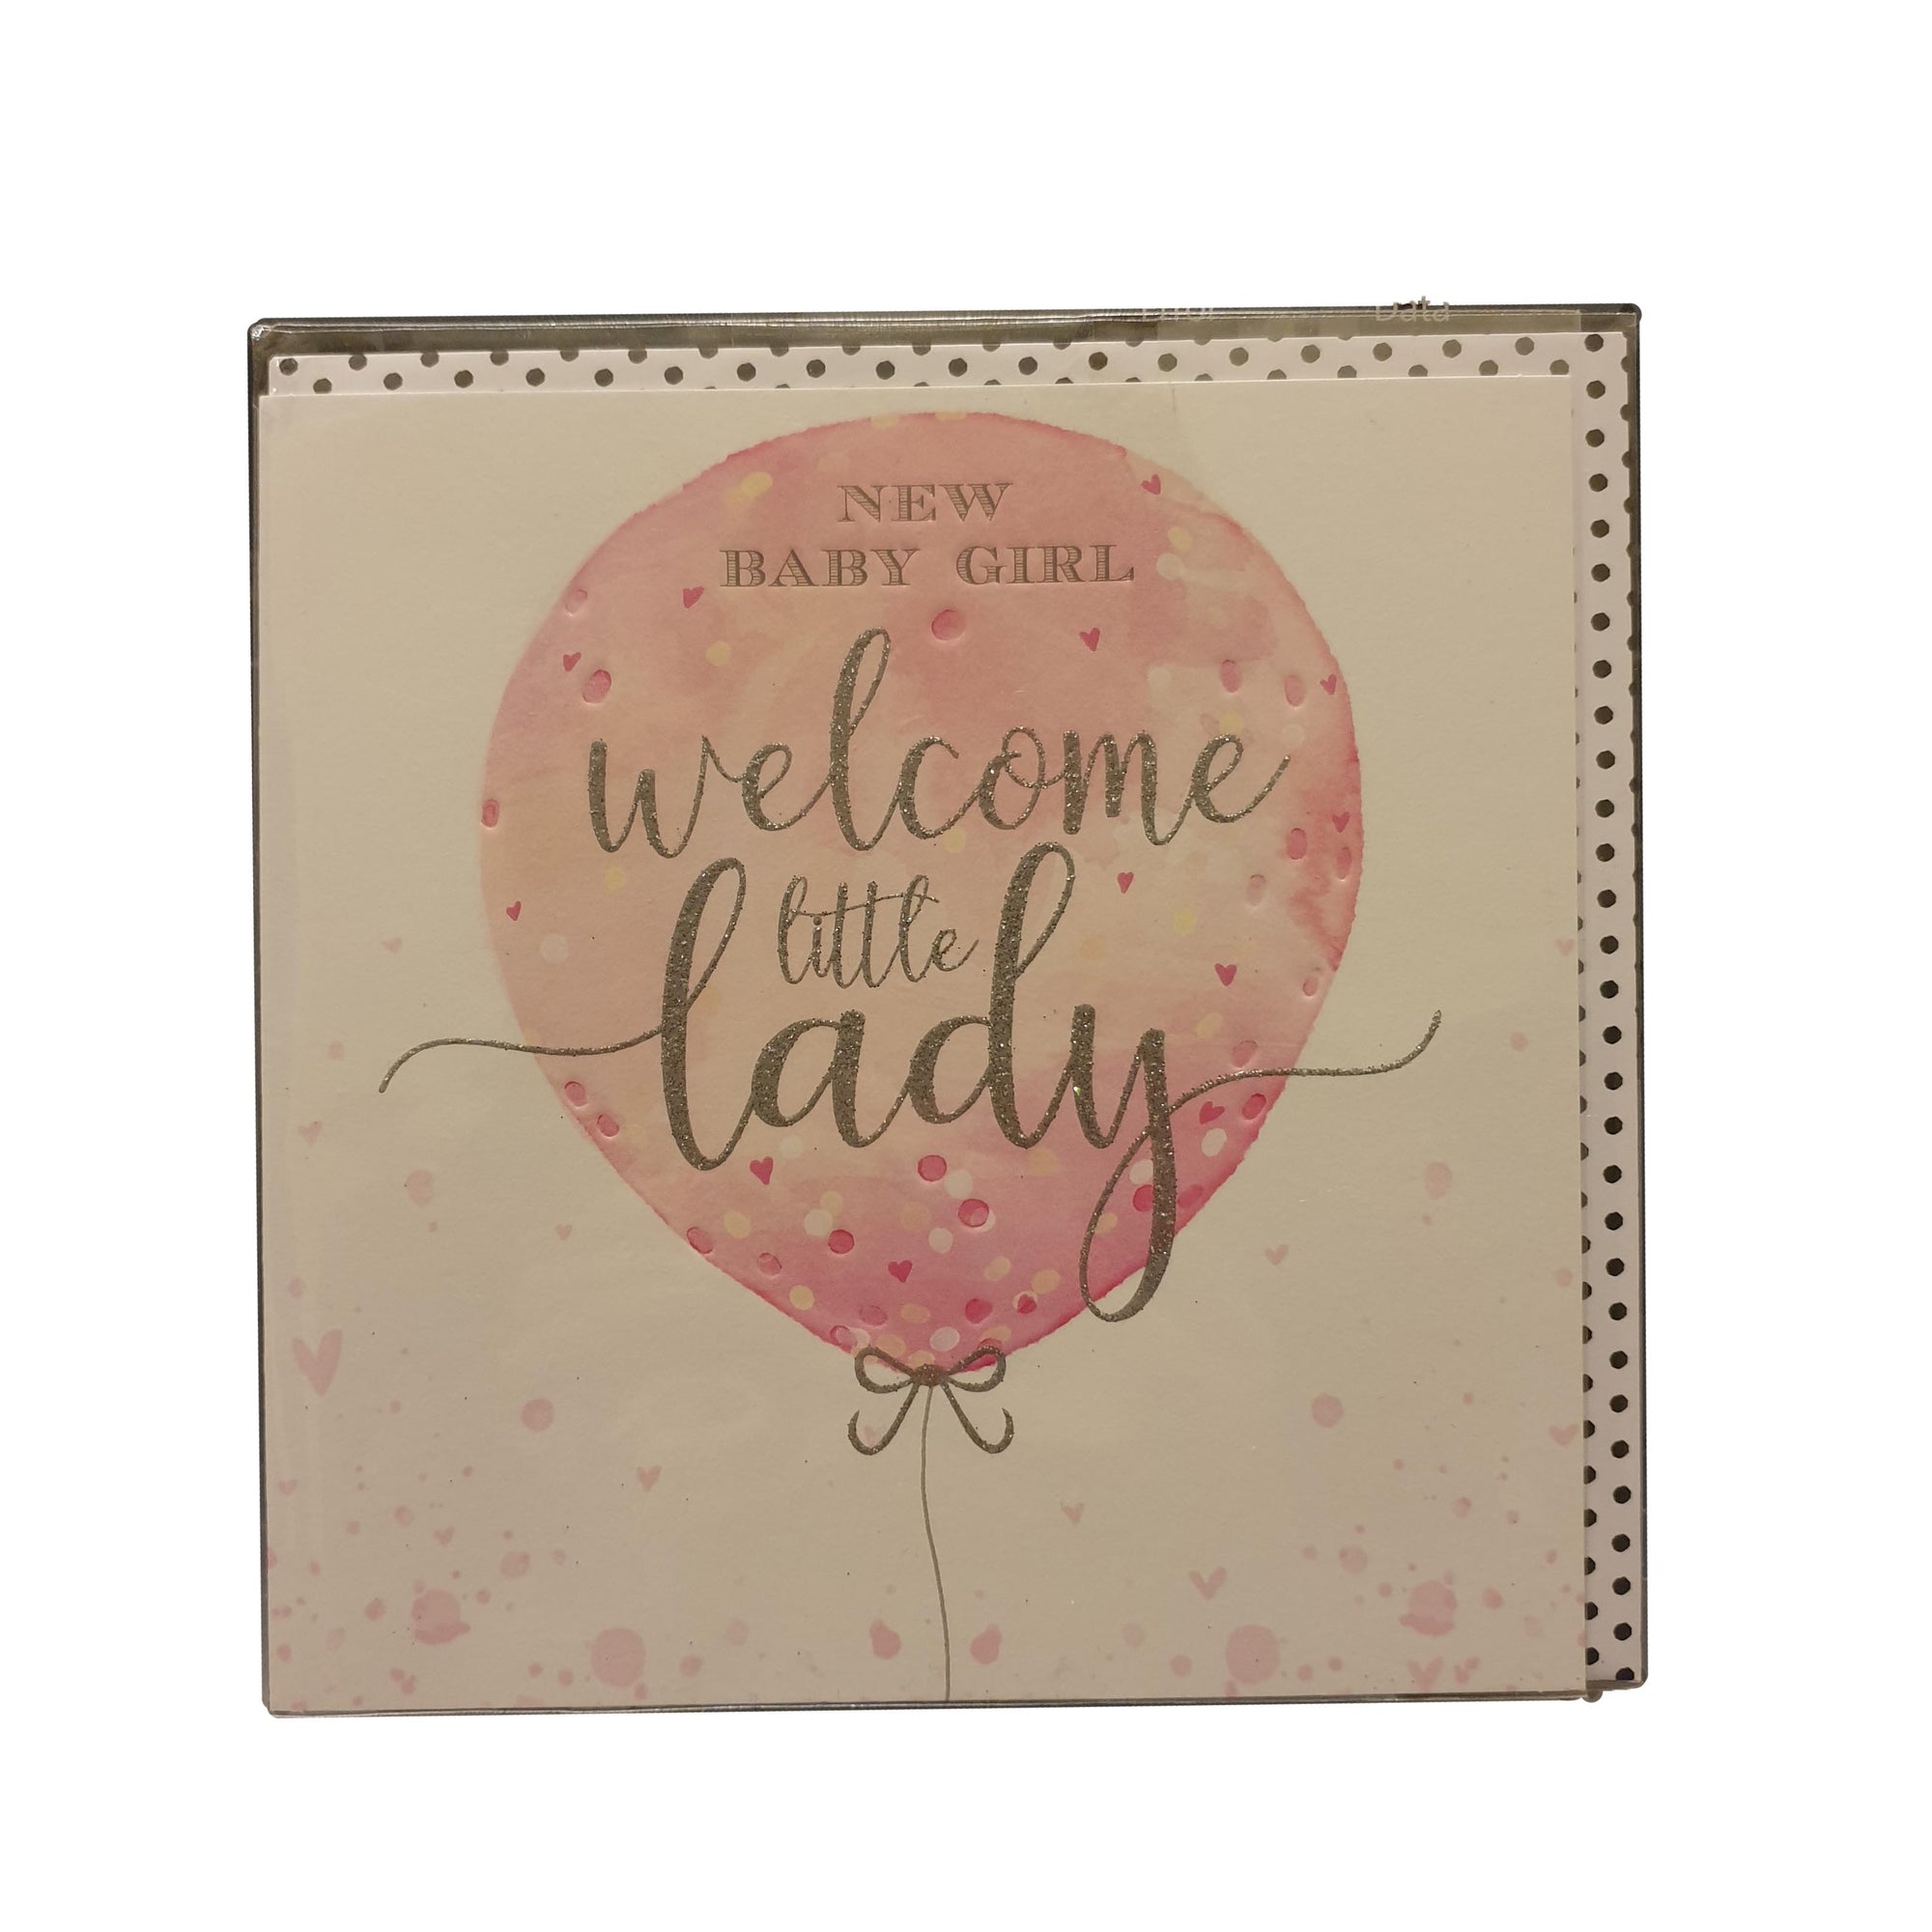 H&G Welcome little lady card